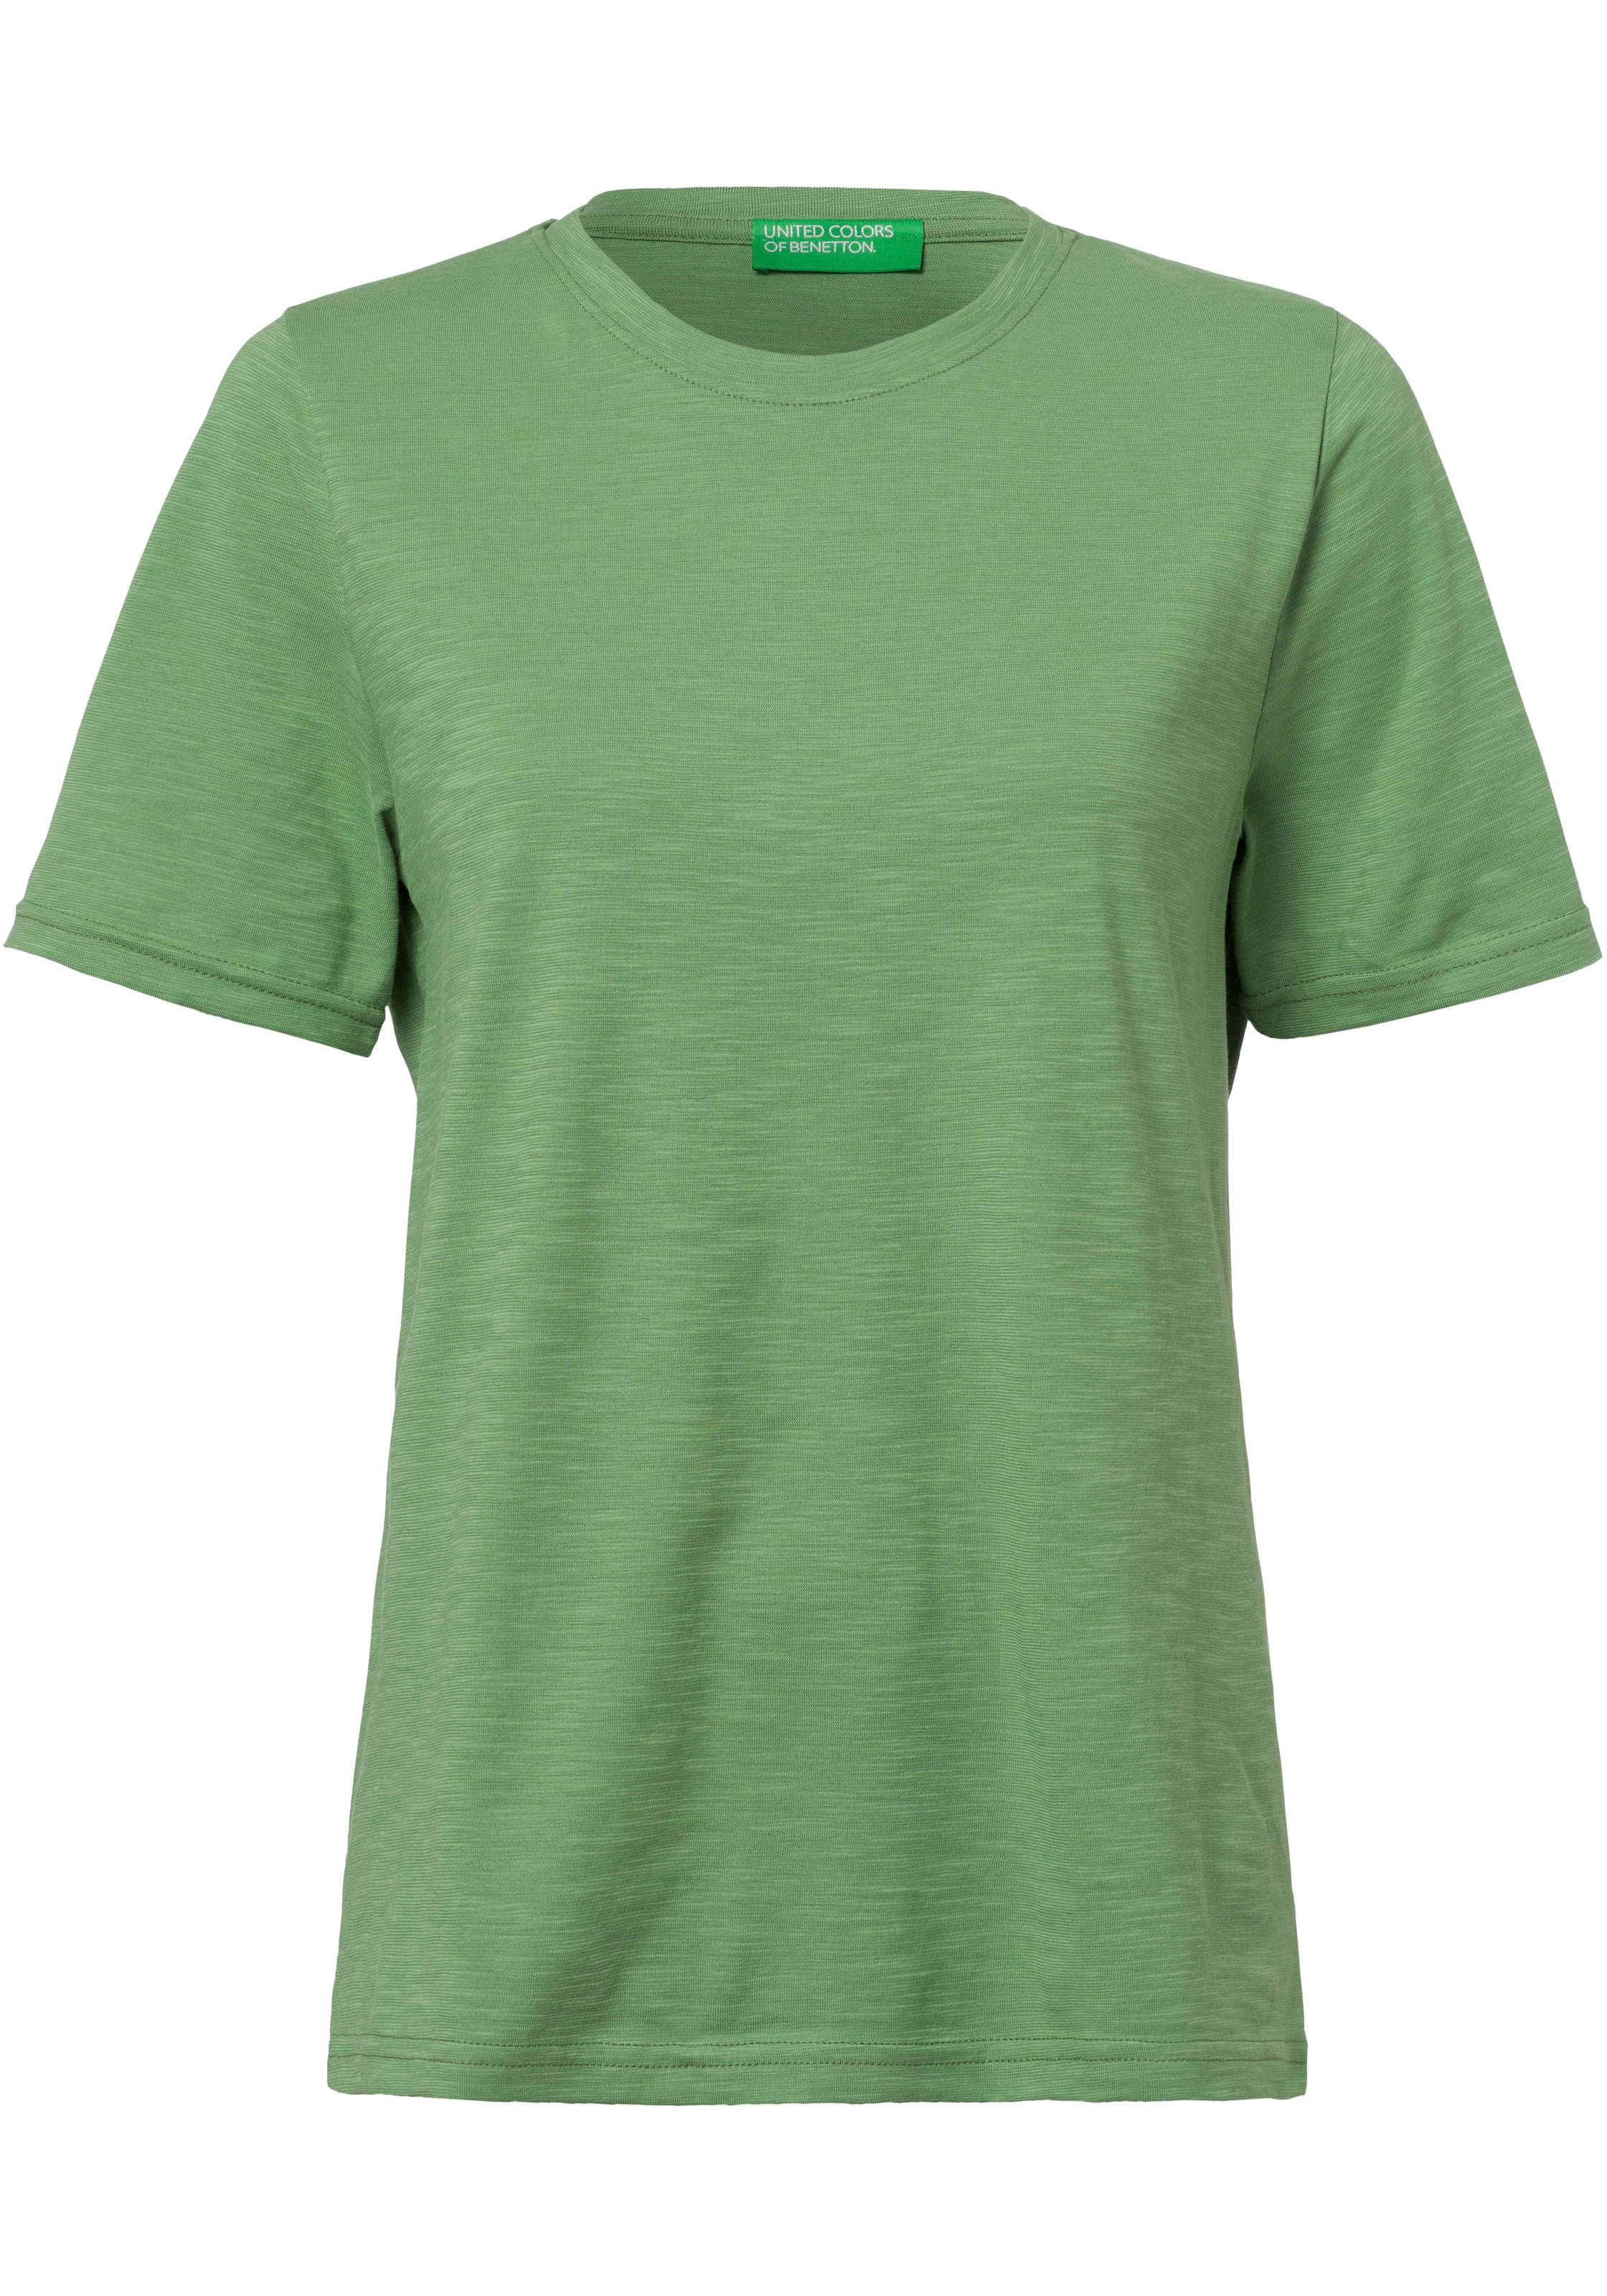 United ♕ Benetton Colors bei in cleaner T-Shirt, of Basic-Optik